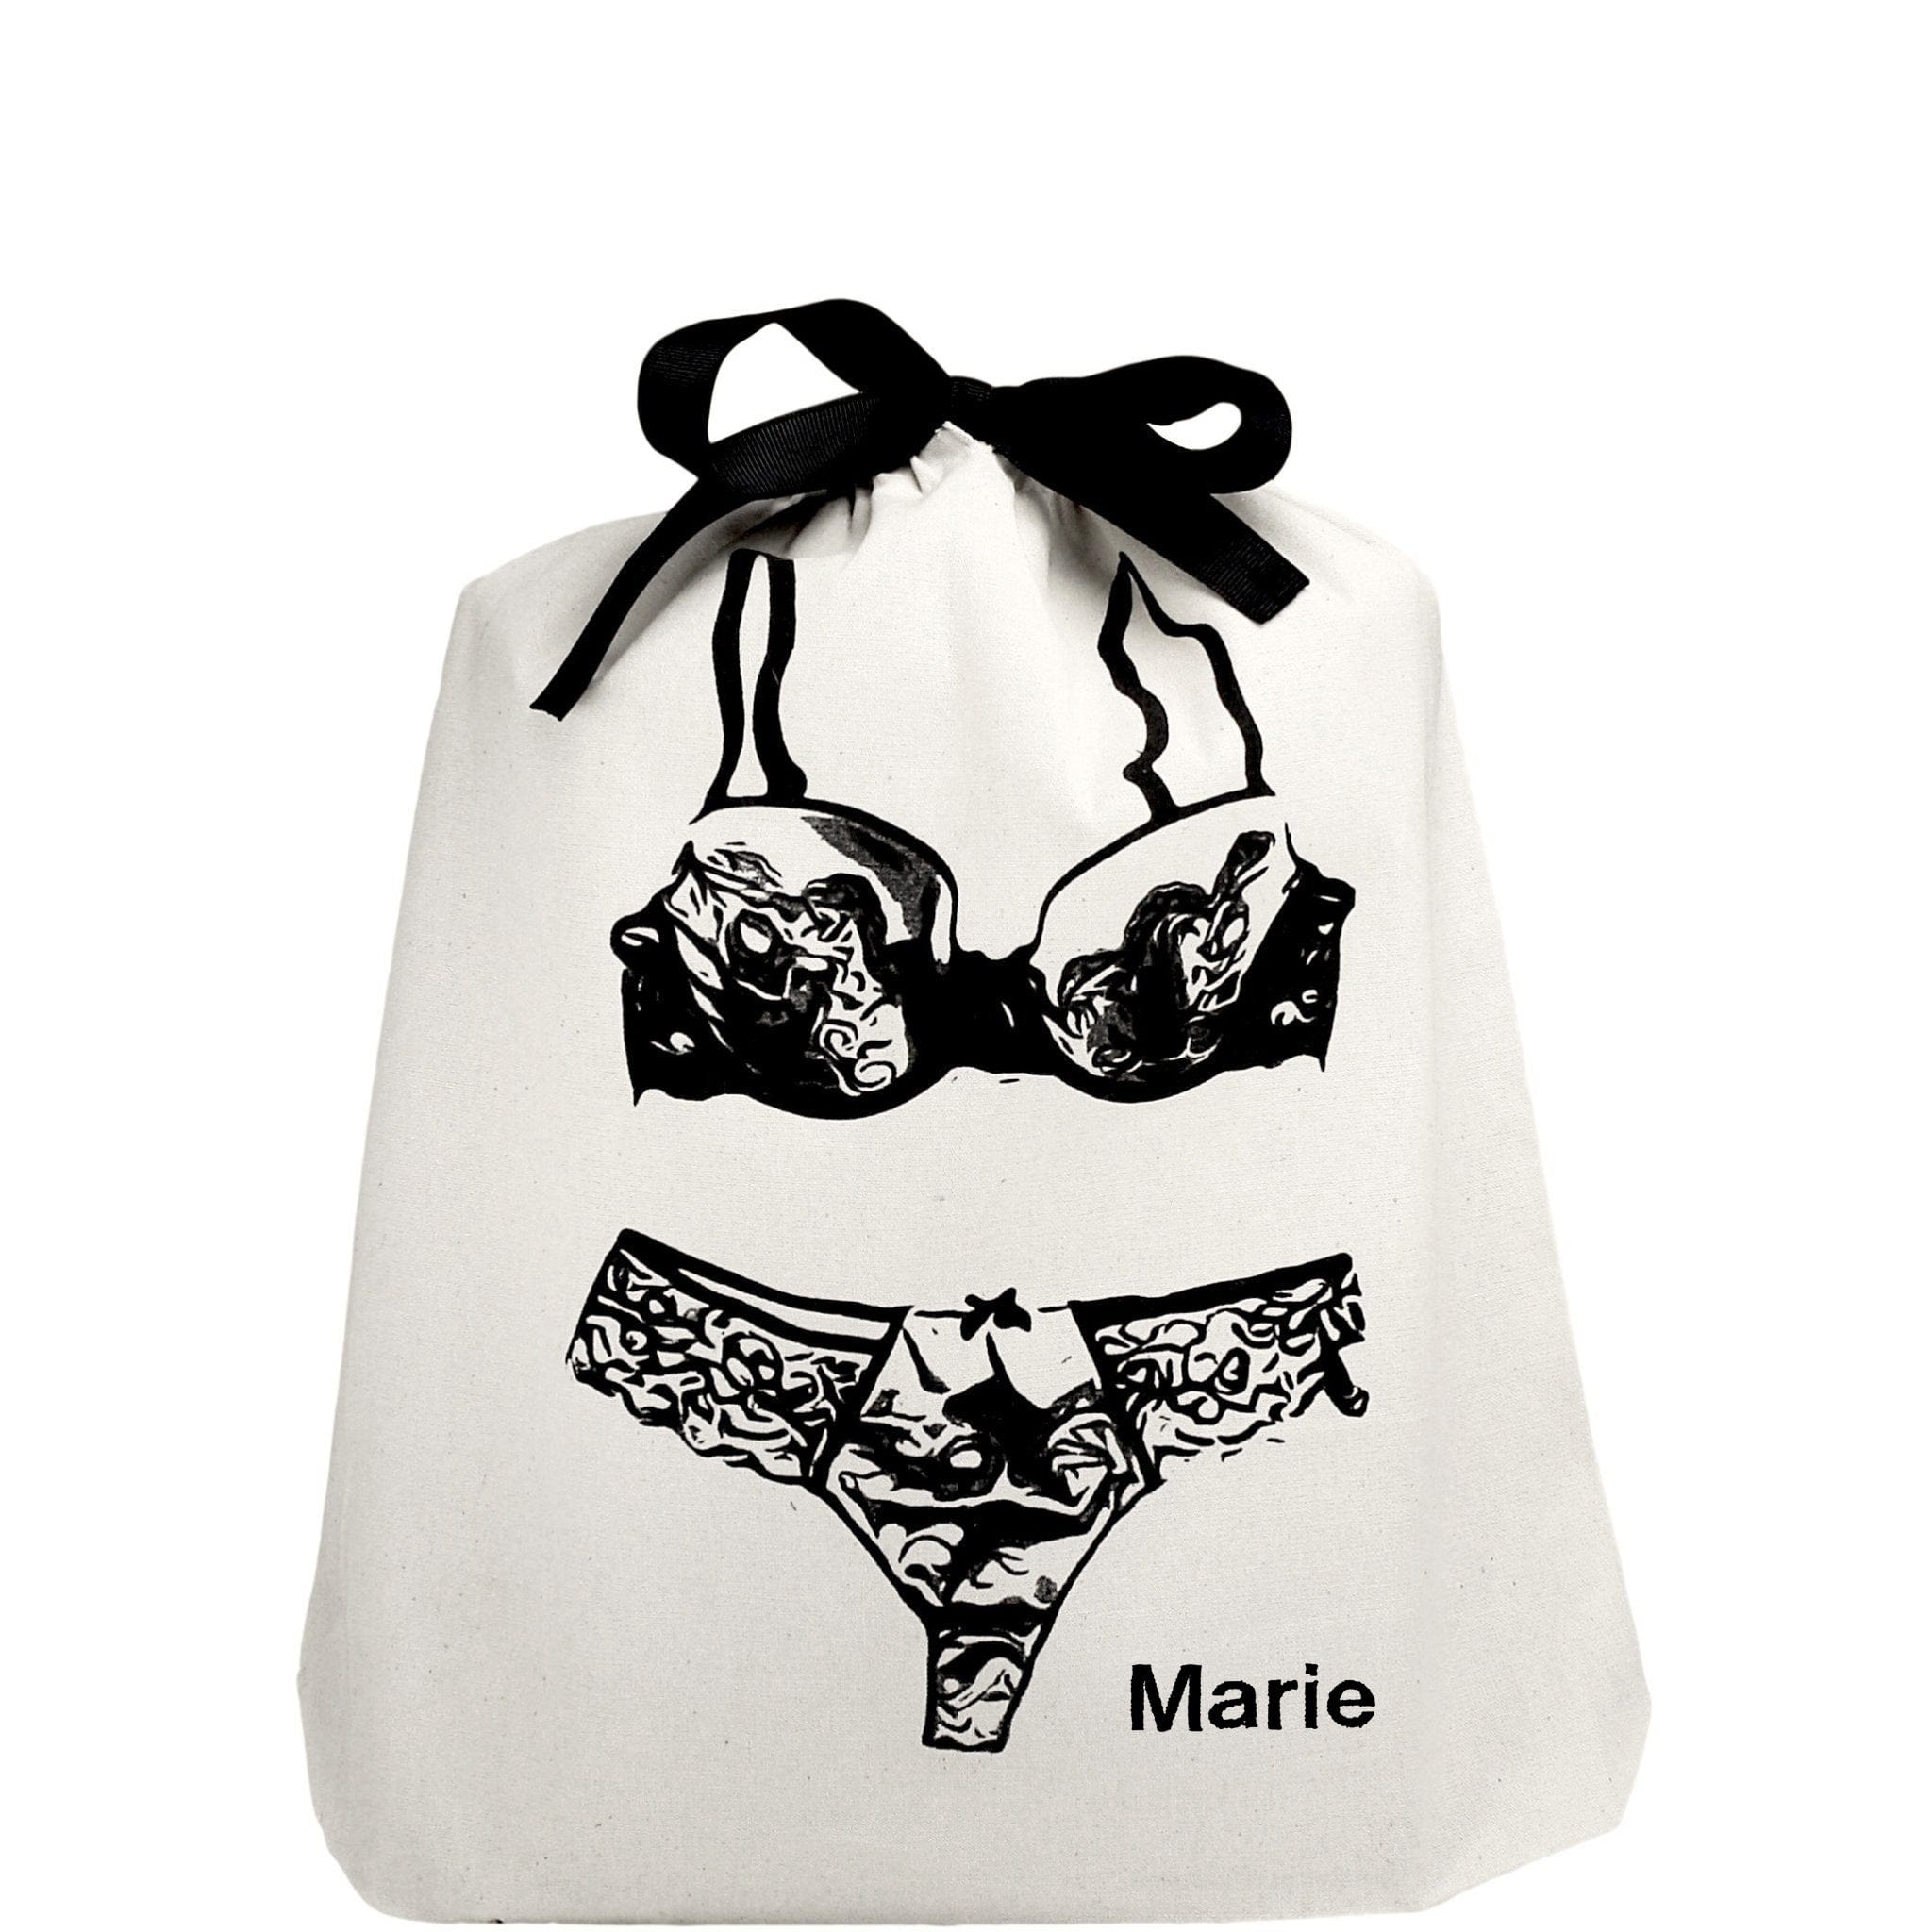 Lace lingerie bag with "marie" monogrammed on the bottom. 